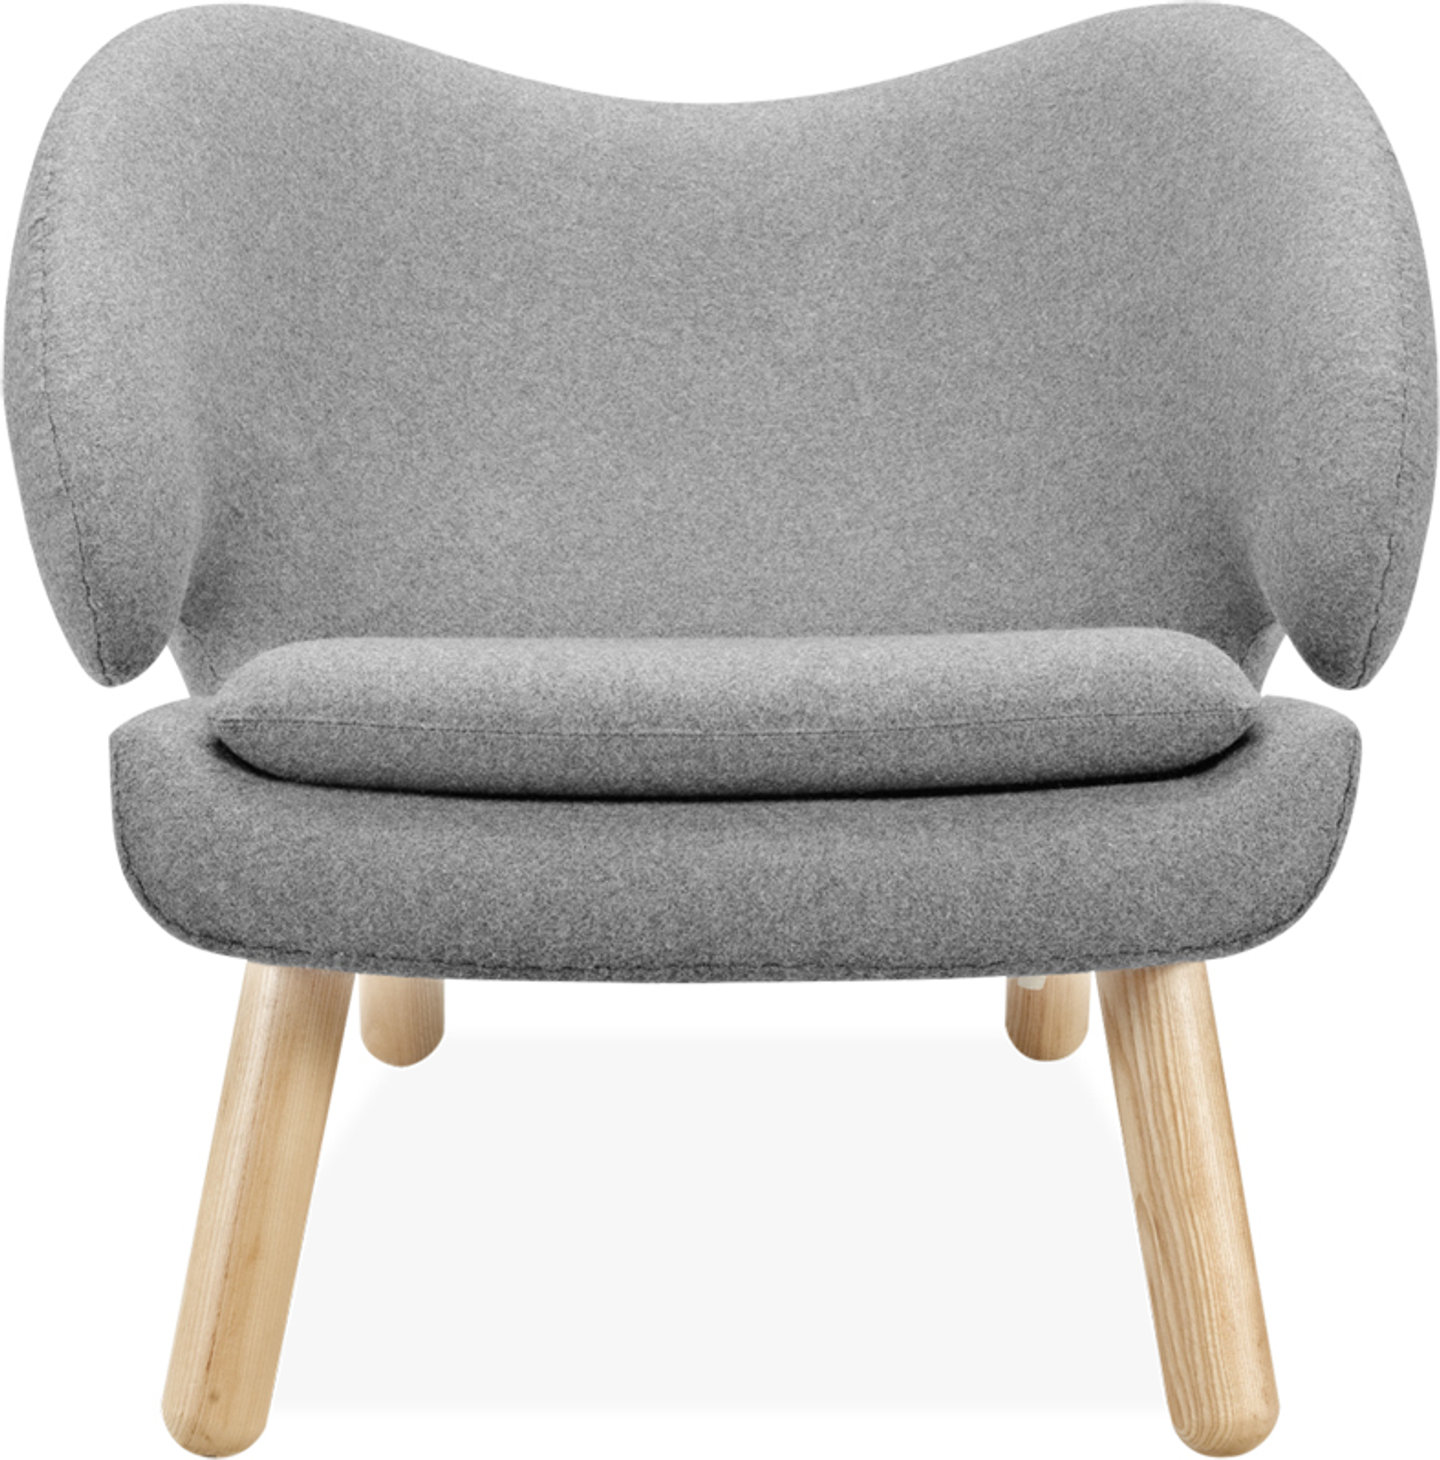 Chaise Pélican Light Pebble Grey image.